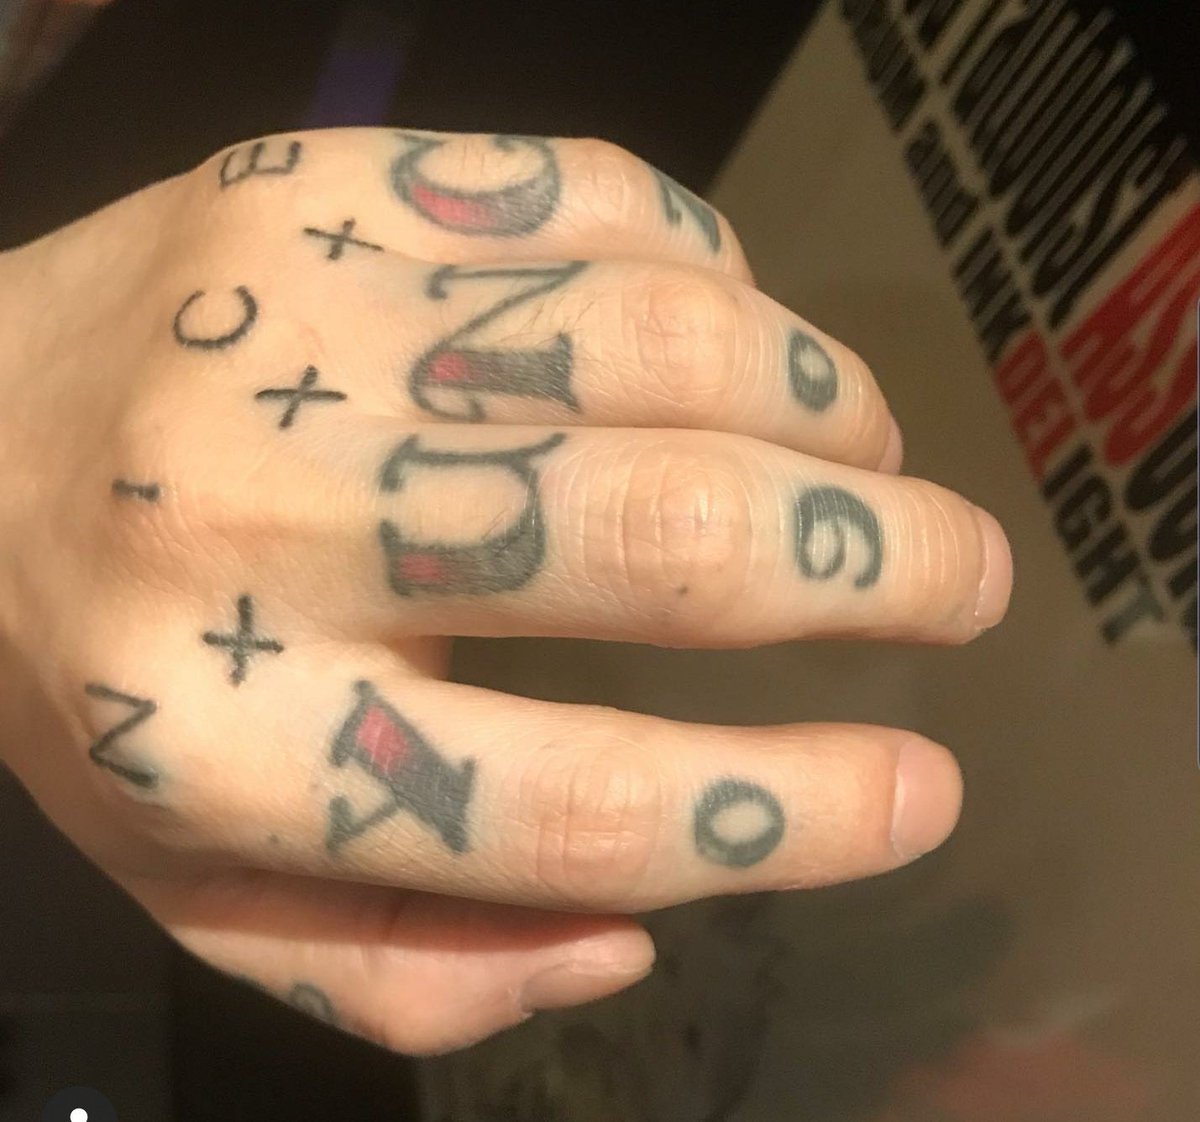 Those tattoos that he has other ppl also have but again you don't mention those ppl.Is J,k dating them too? Also this tattoo is a design that belongs to the shop so if he made his tattoos there it's normal that he looked into their designs. https://twitter.com/jjpp131211/status/1264064820887932929?s=19